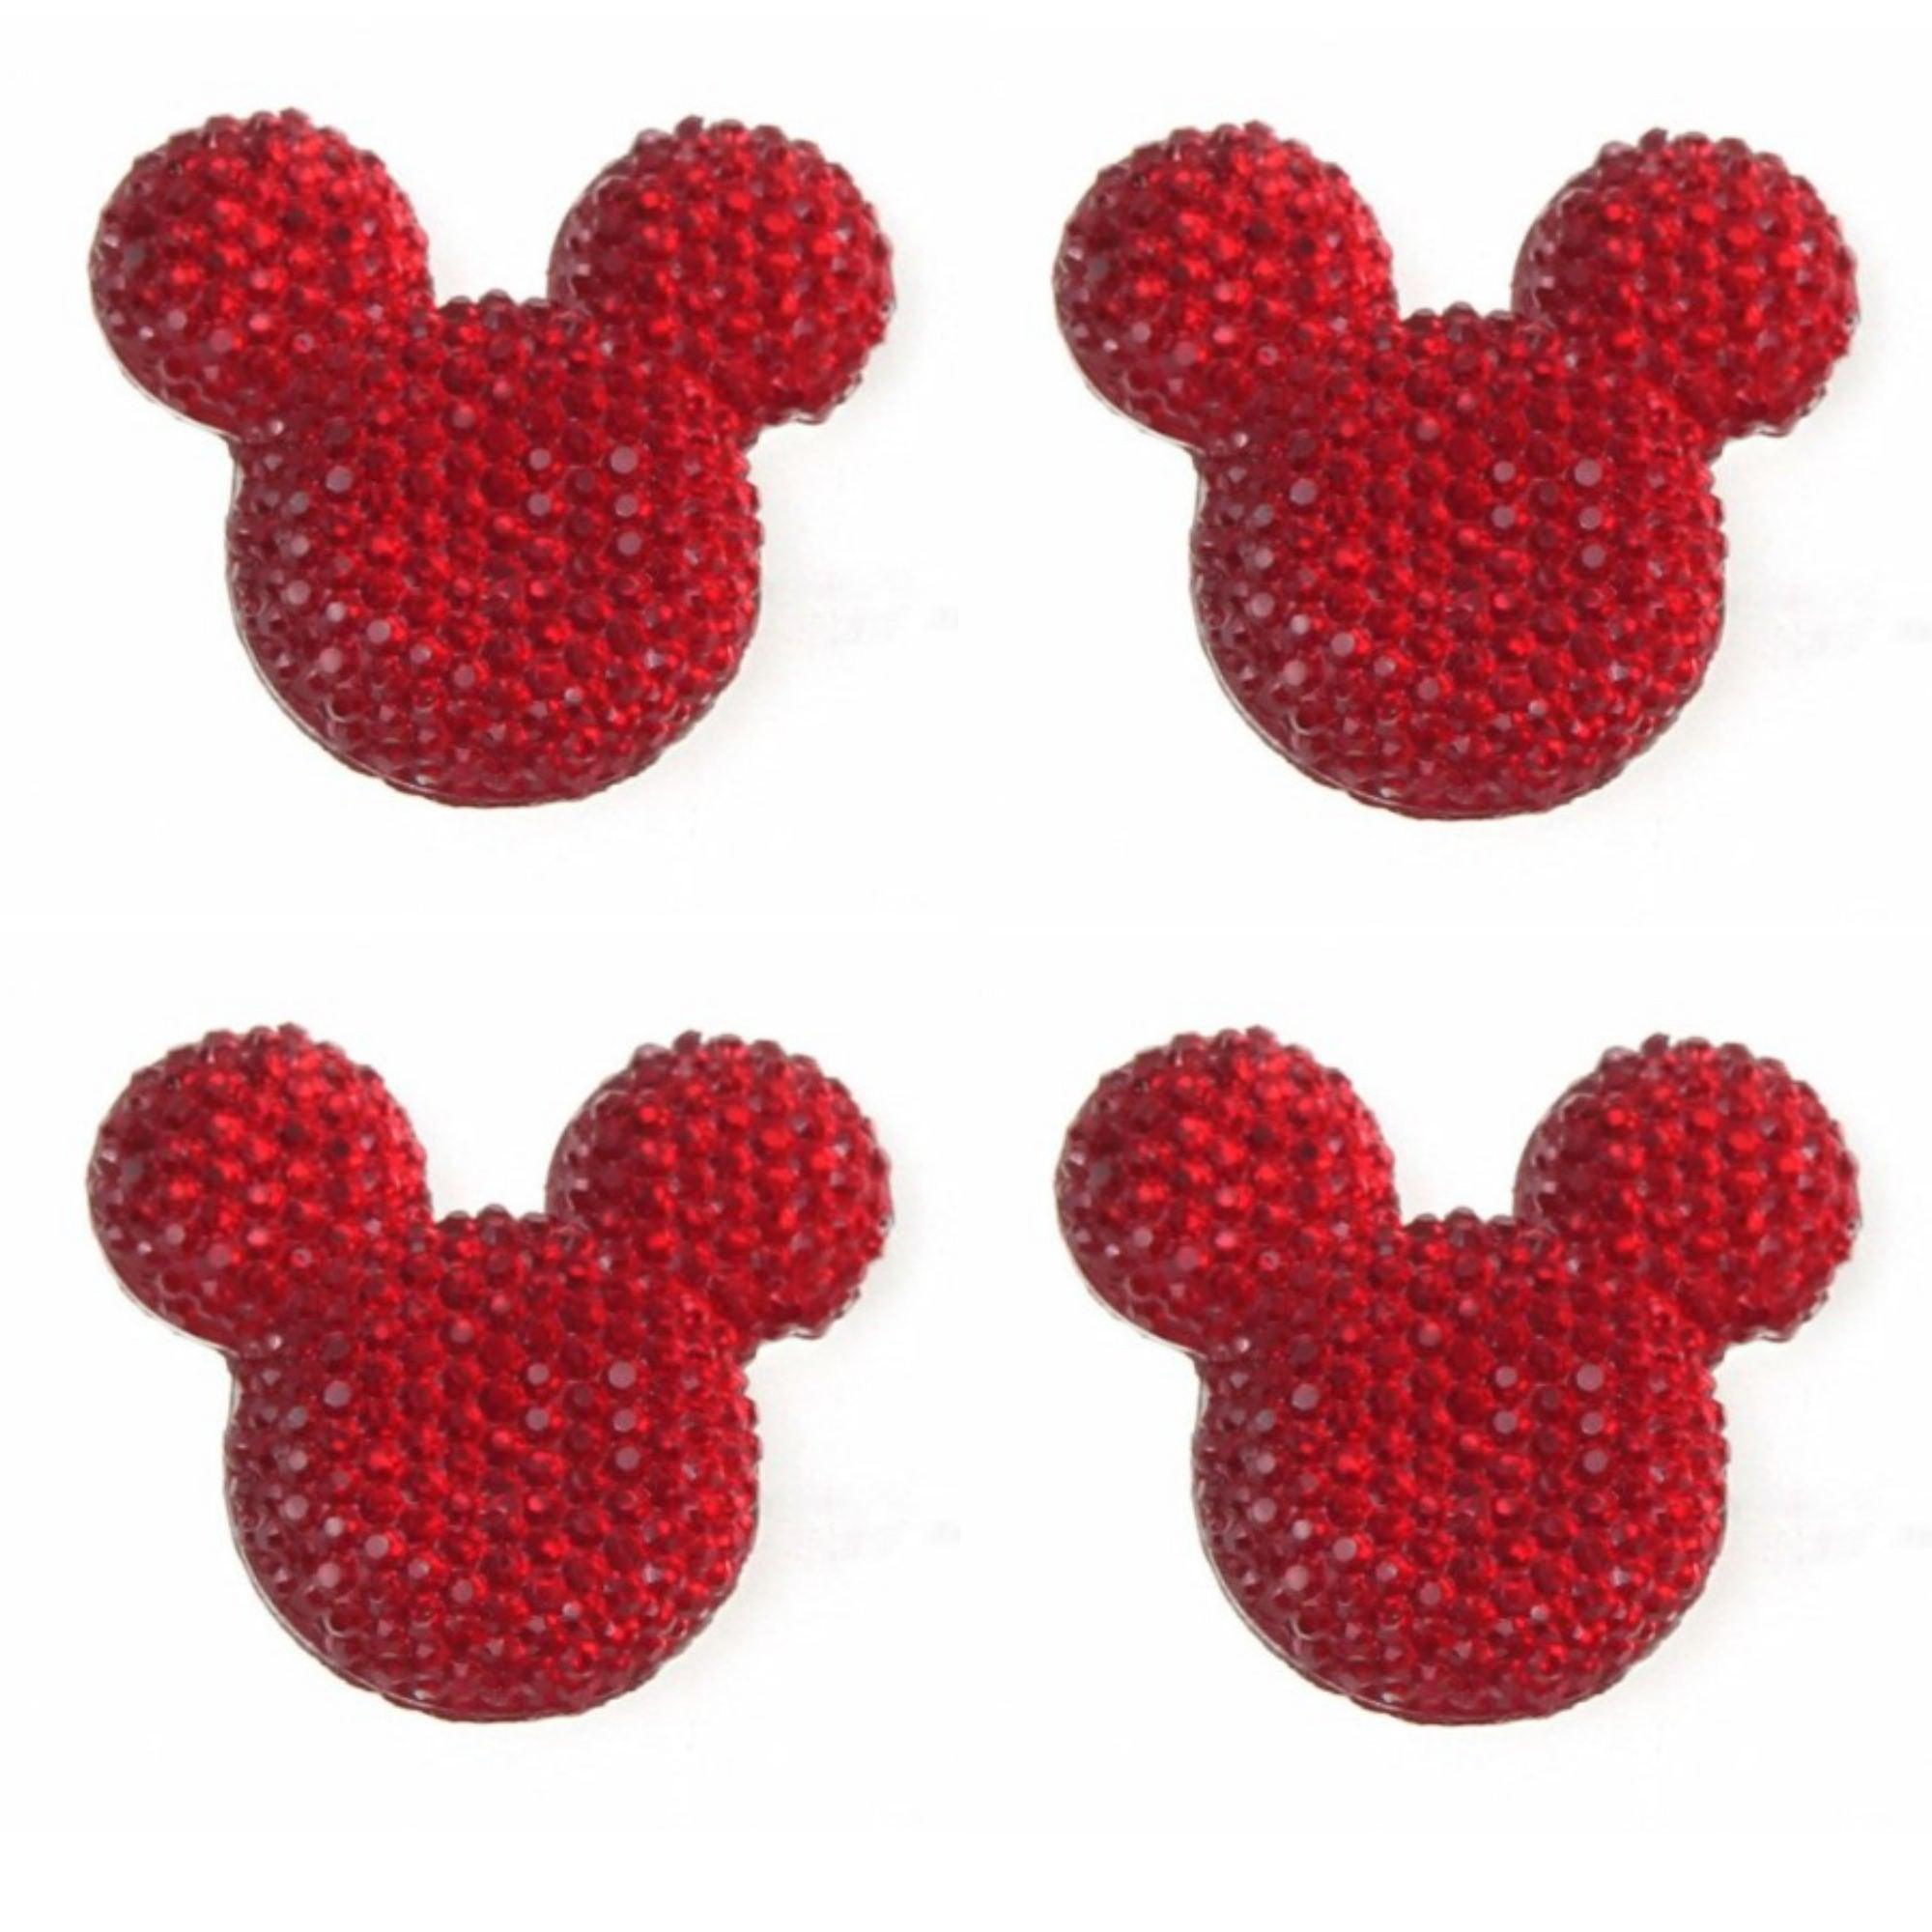 Disneyana Collection 1.25" Bling Red Mouse Ears Scrapbook Embellishments by SSC Designs - 4 Pieces